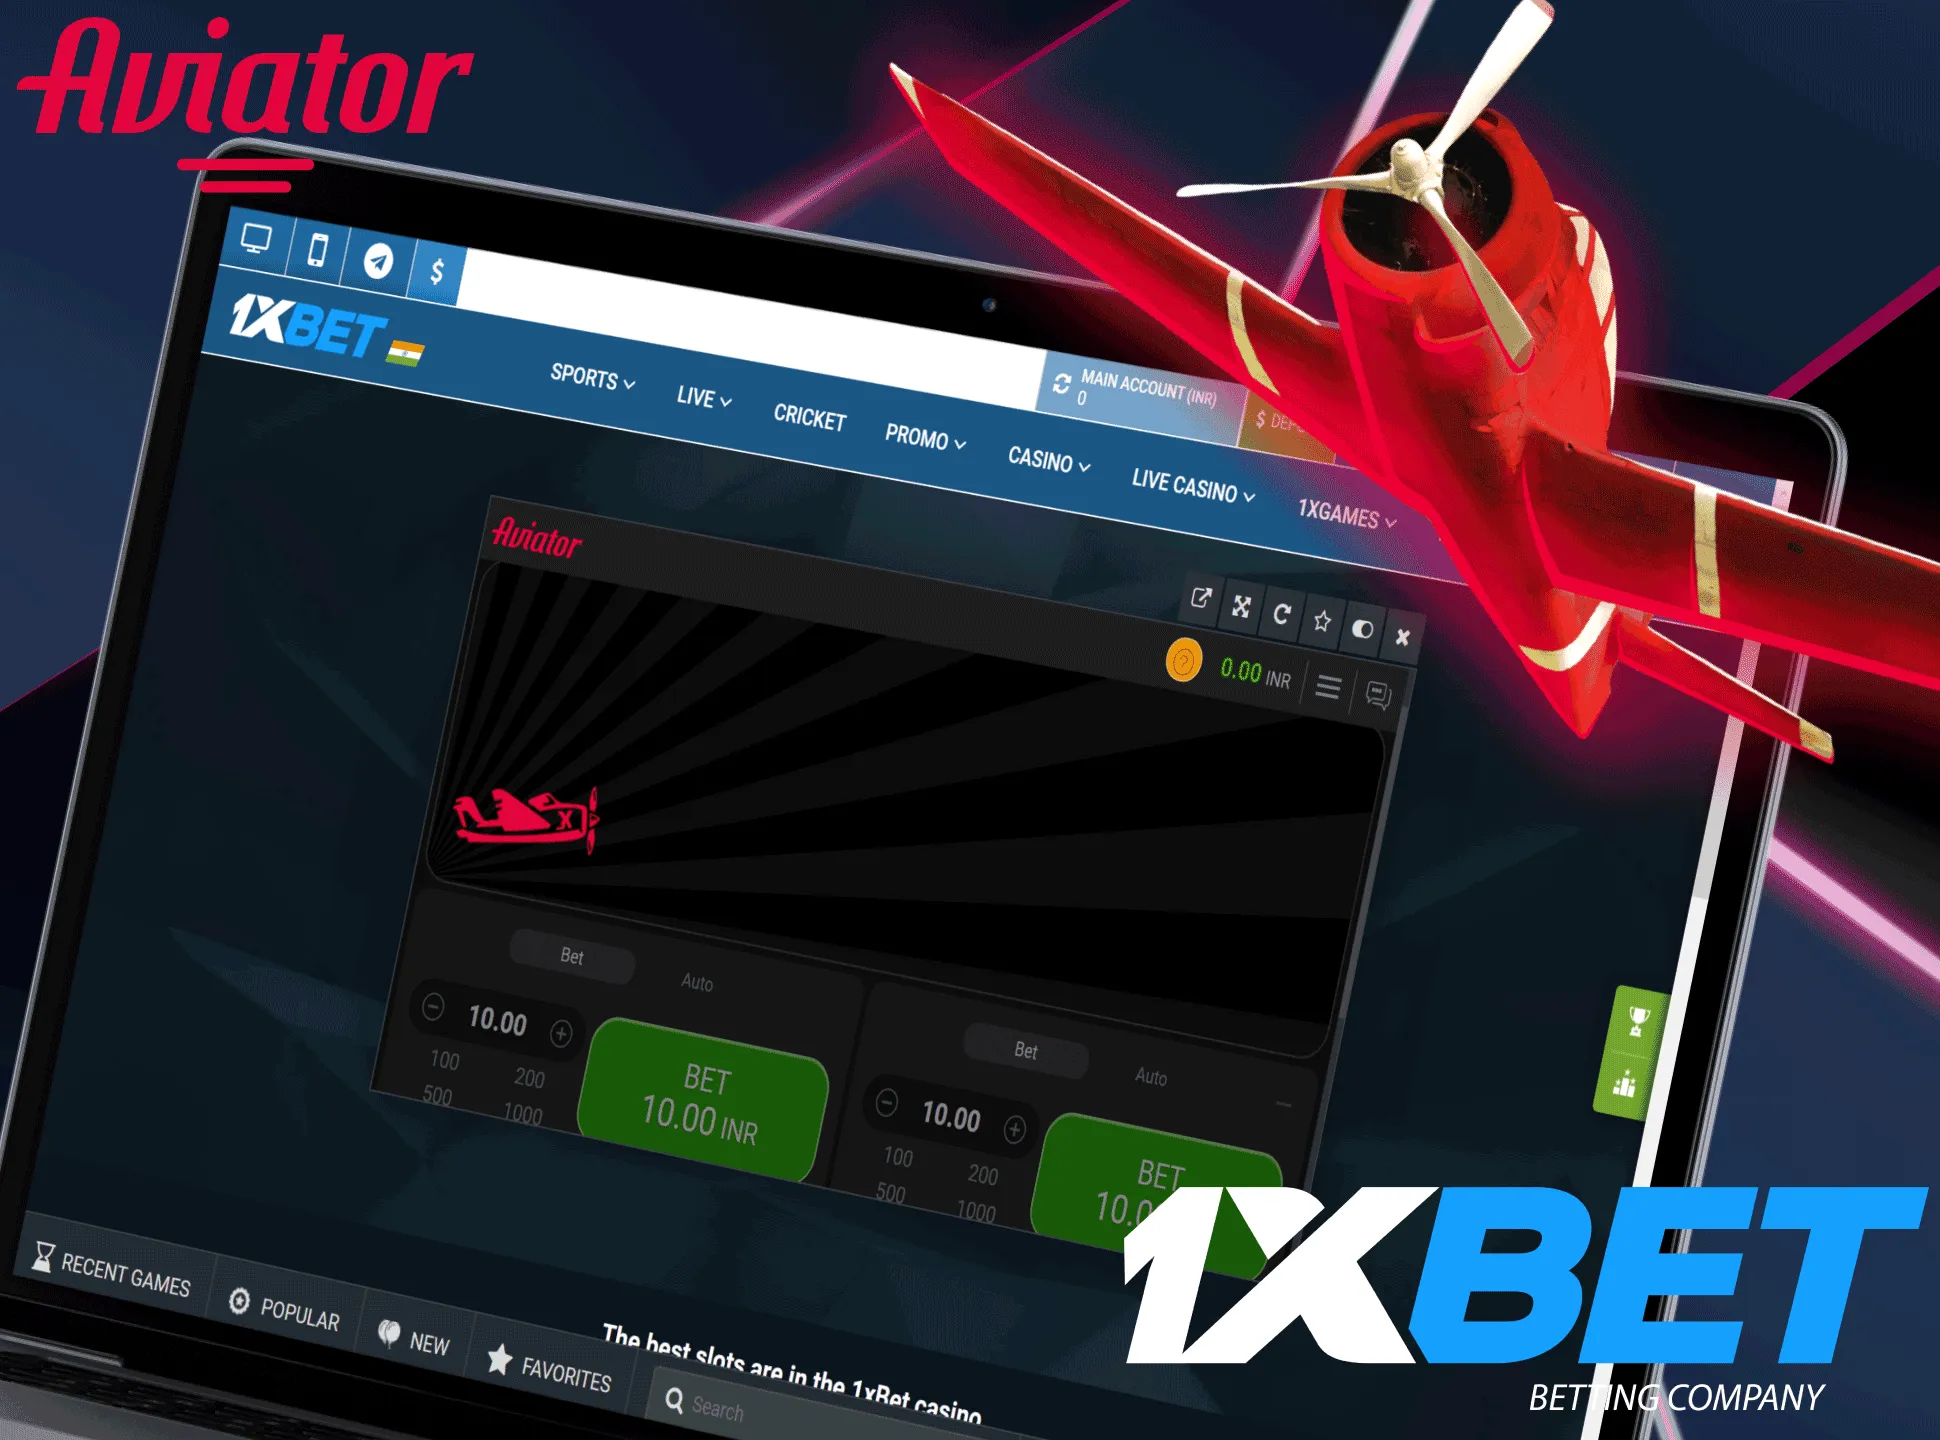 Get a new experience when you play Aviator game at the 1xbet casino.